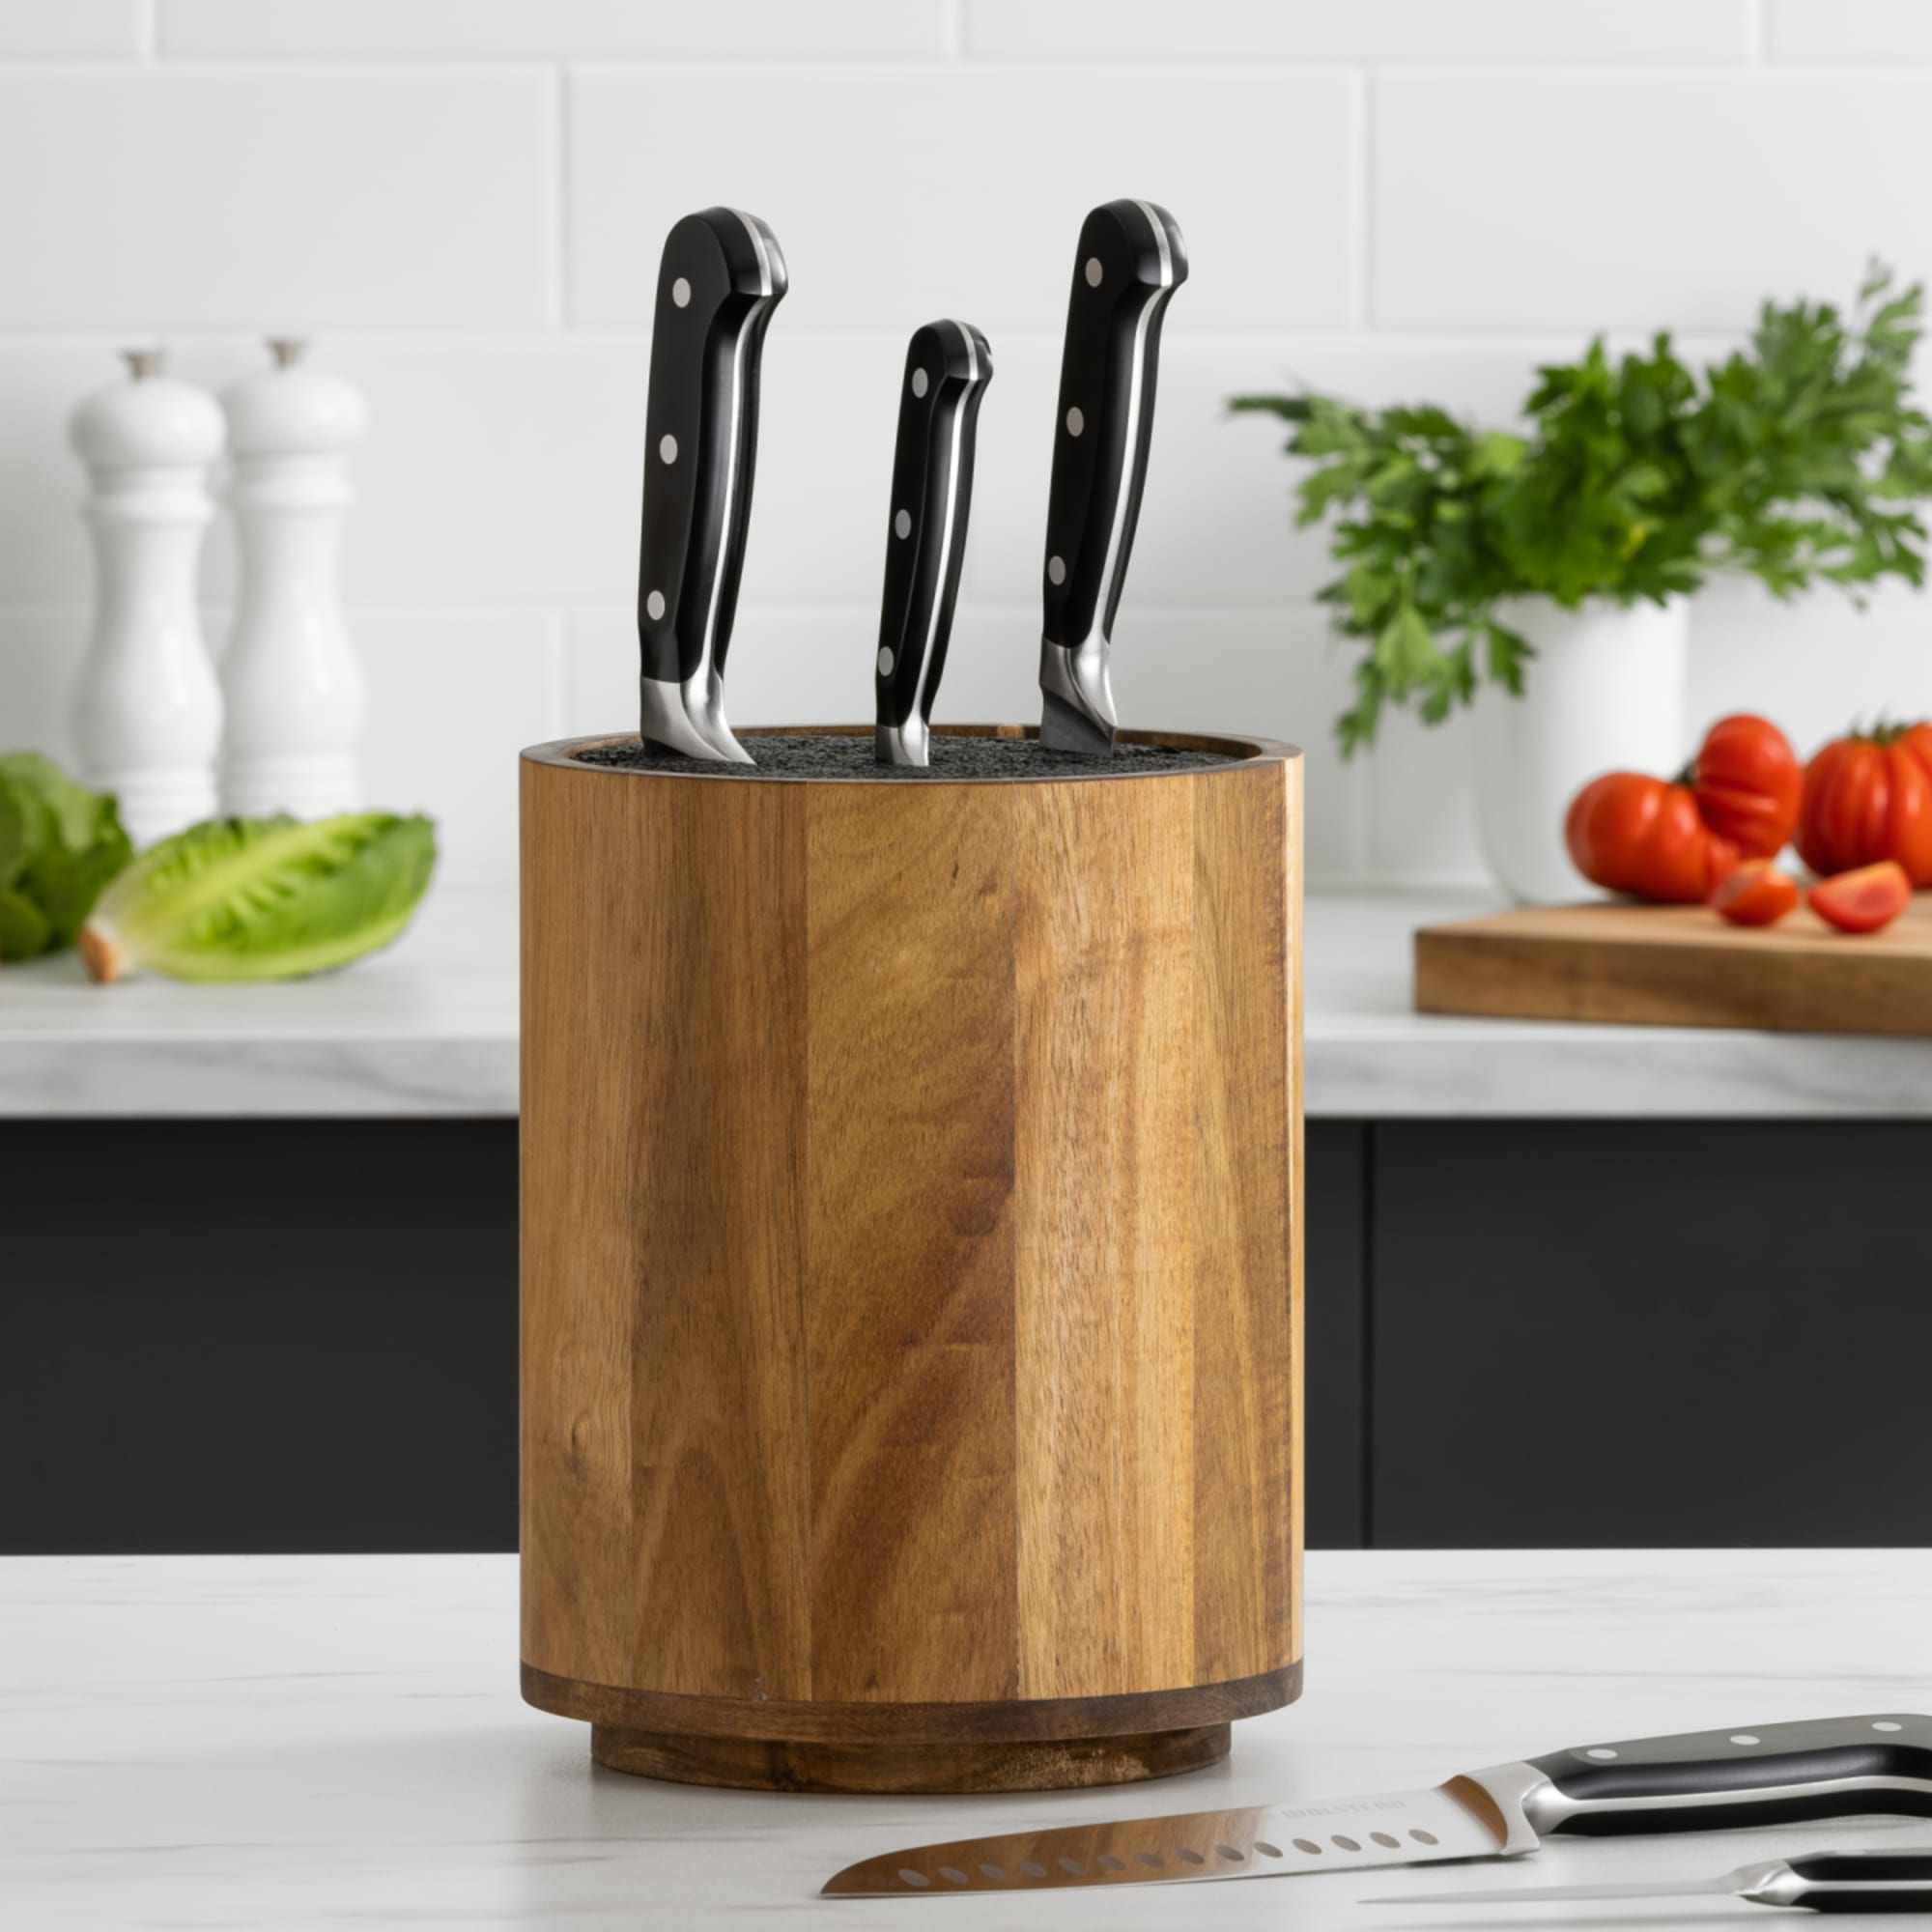 https://res.cloudinary.com/kitchenwarehouse/image/upload/c_fill,g_face,w_1250/f_auto/t_PDP_2000x2000/Kitchen%20Warehouse%20Images%20/Wolstead-Round-Large-Universal-Knife-Block-LS_xynosh.jpg